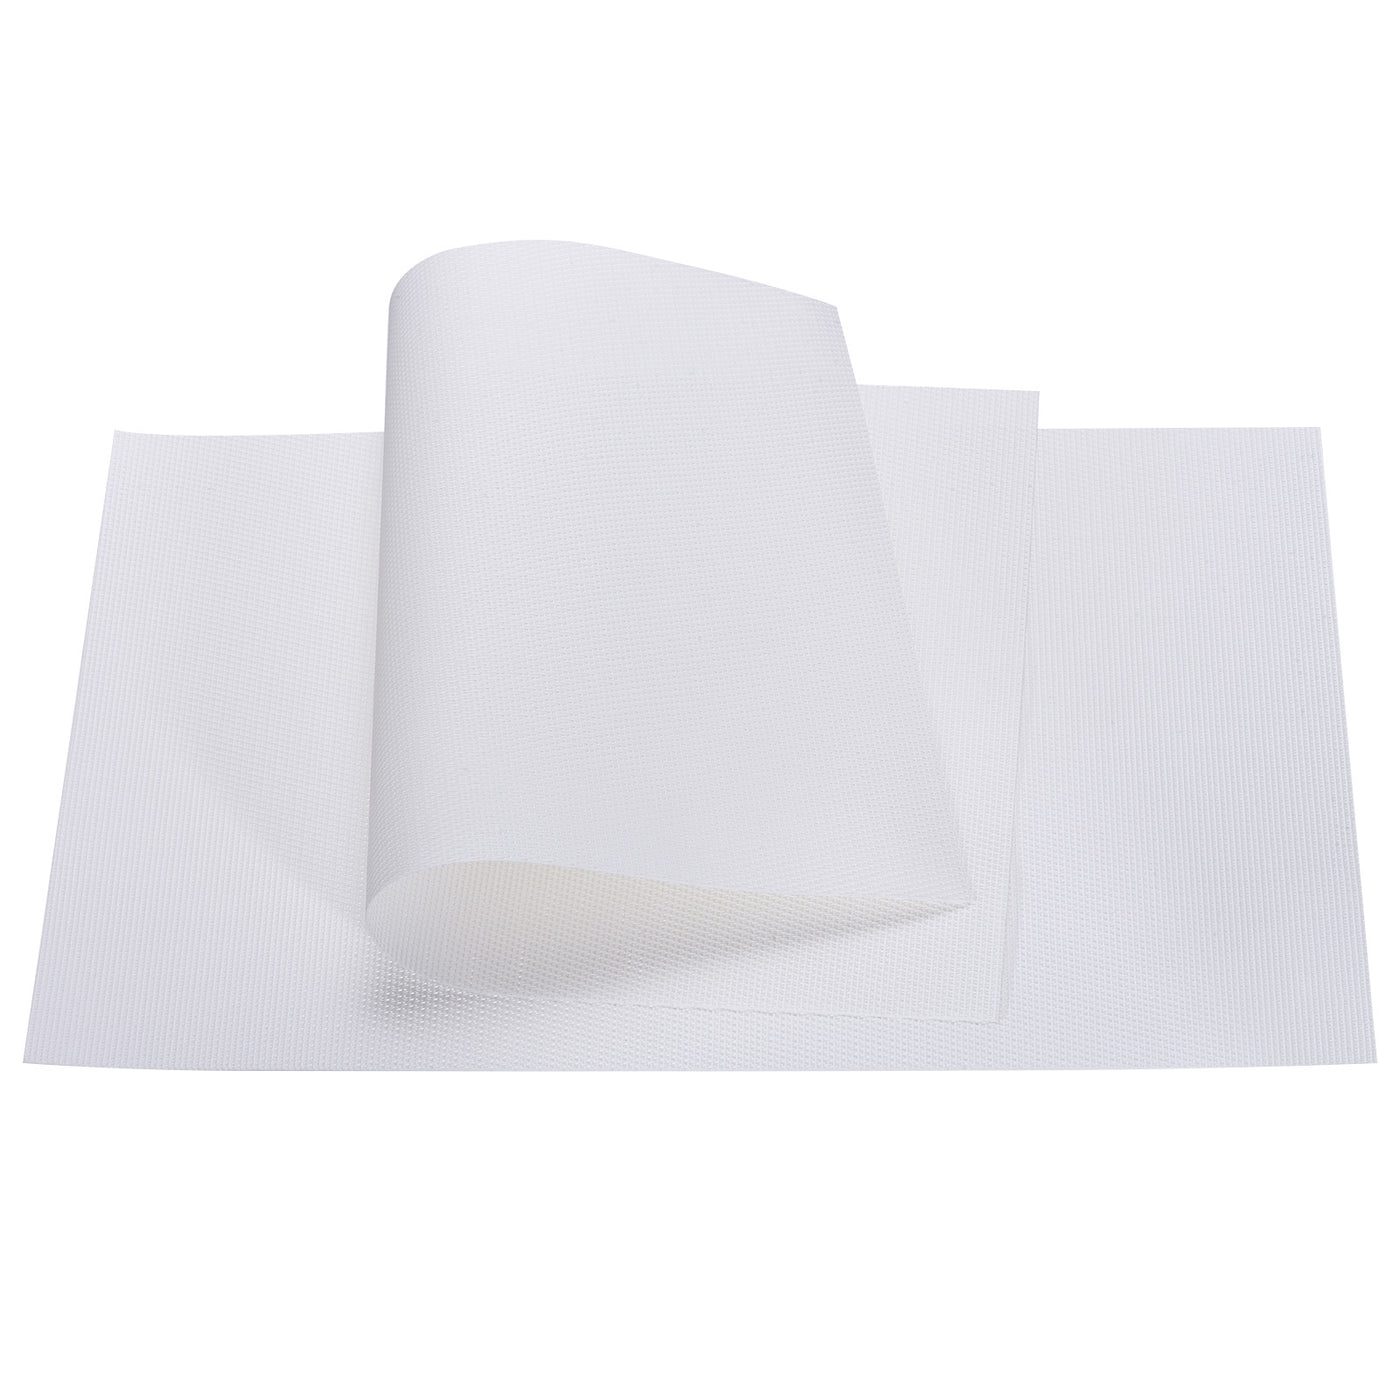 uxcell Uxcell Place Mats 450x300mm 8pcs PVC Table Washable Woven Placemat, White